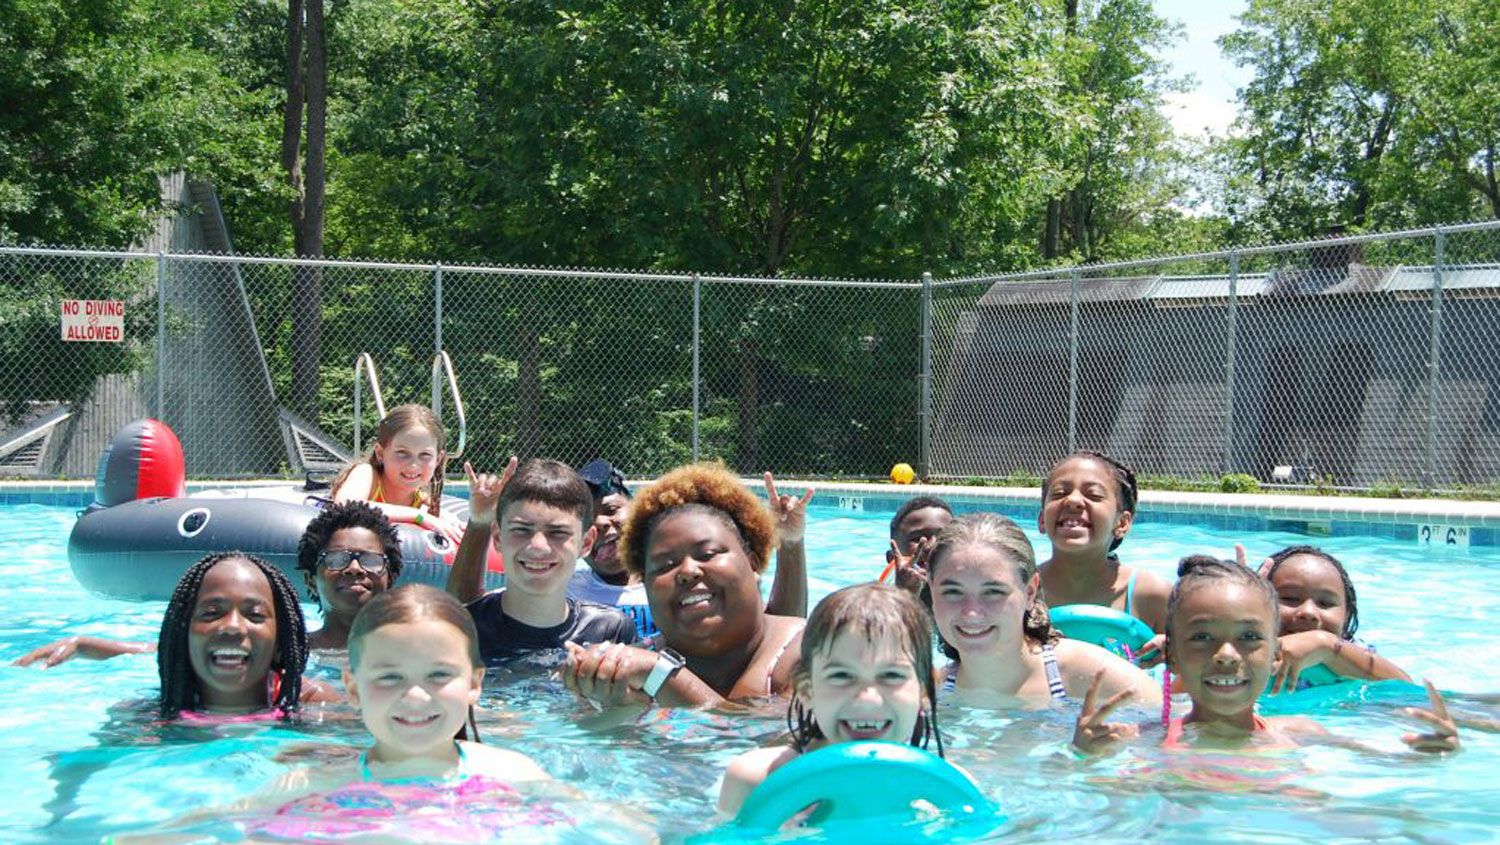 Campers at Betsy-Jeff Penn 4-H Center enjoy pool time during a previous camp.